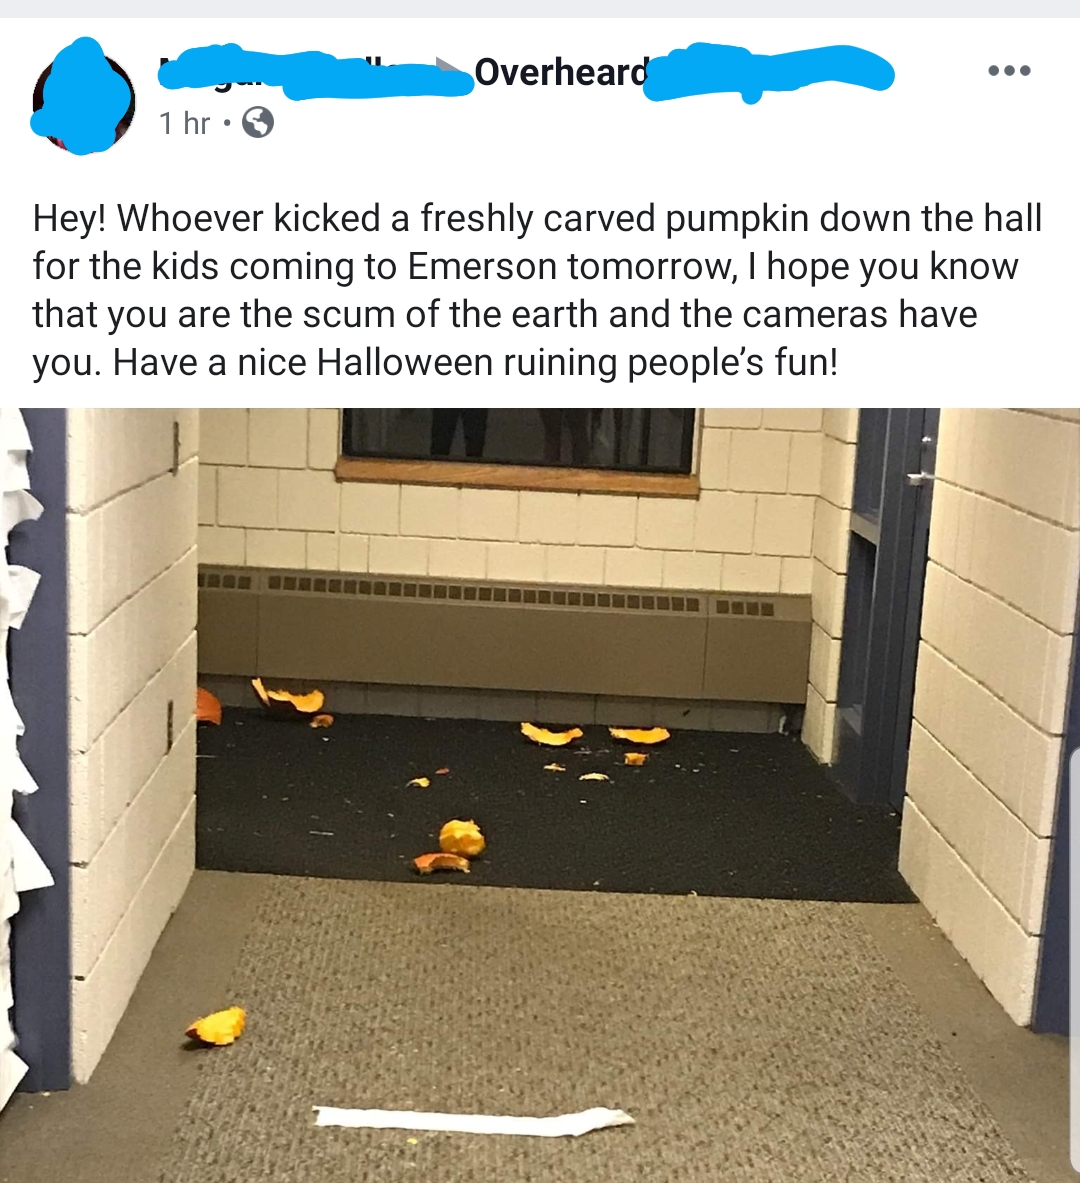 floor - Overheard 1 hr. Hey! Whoever kicked a freshly carved pumpkin down the hall for the kids coming to Emerson tomorrow, I hope you know that you are the scum of the earth and the cameras have you. Have a nice Halloween ruining people's fun!